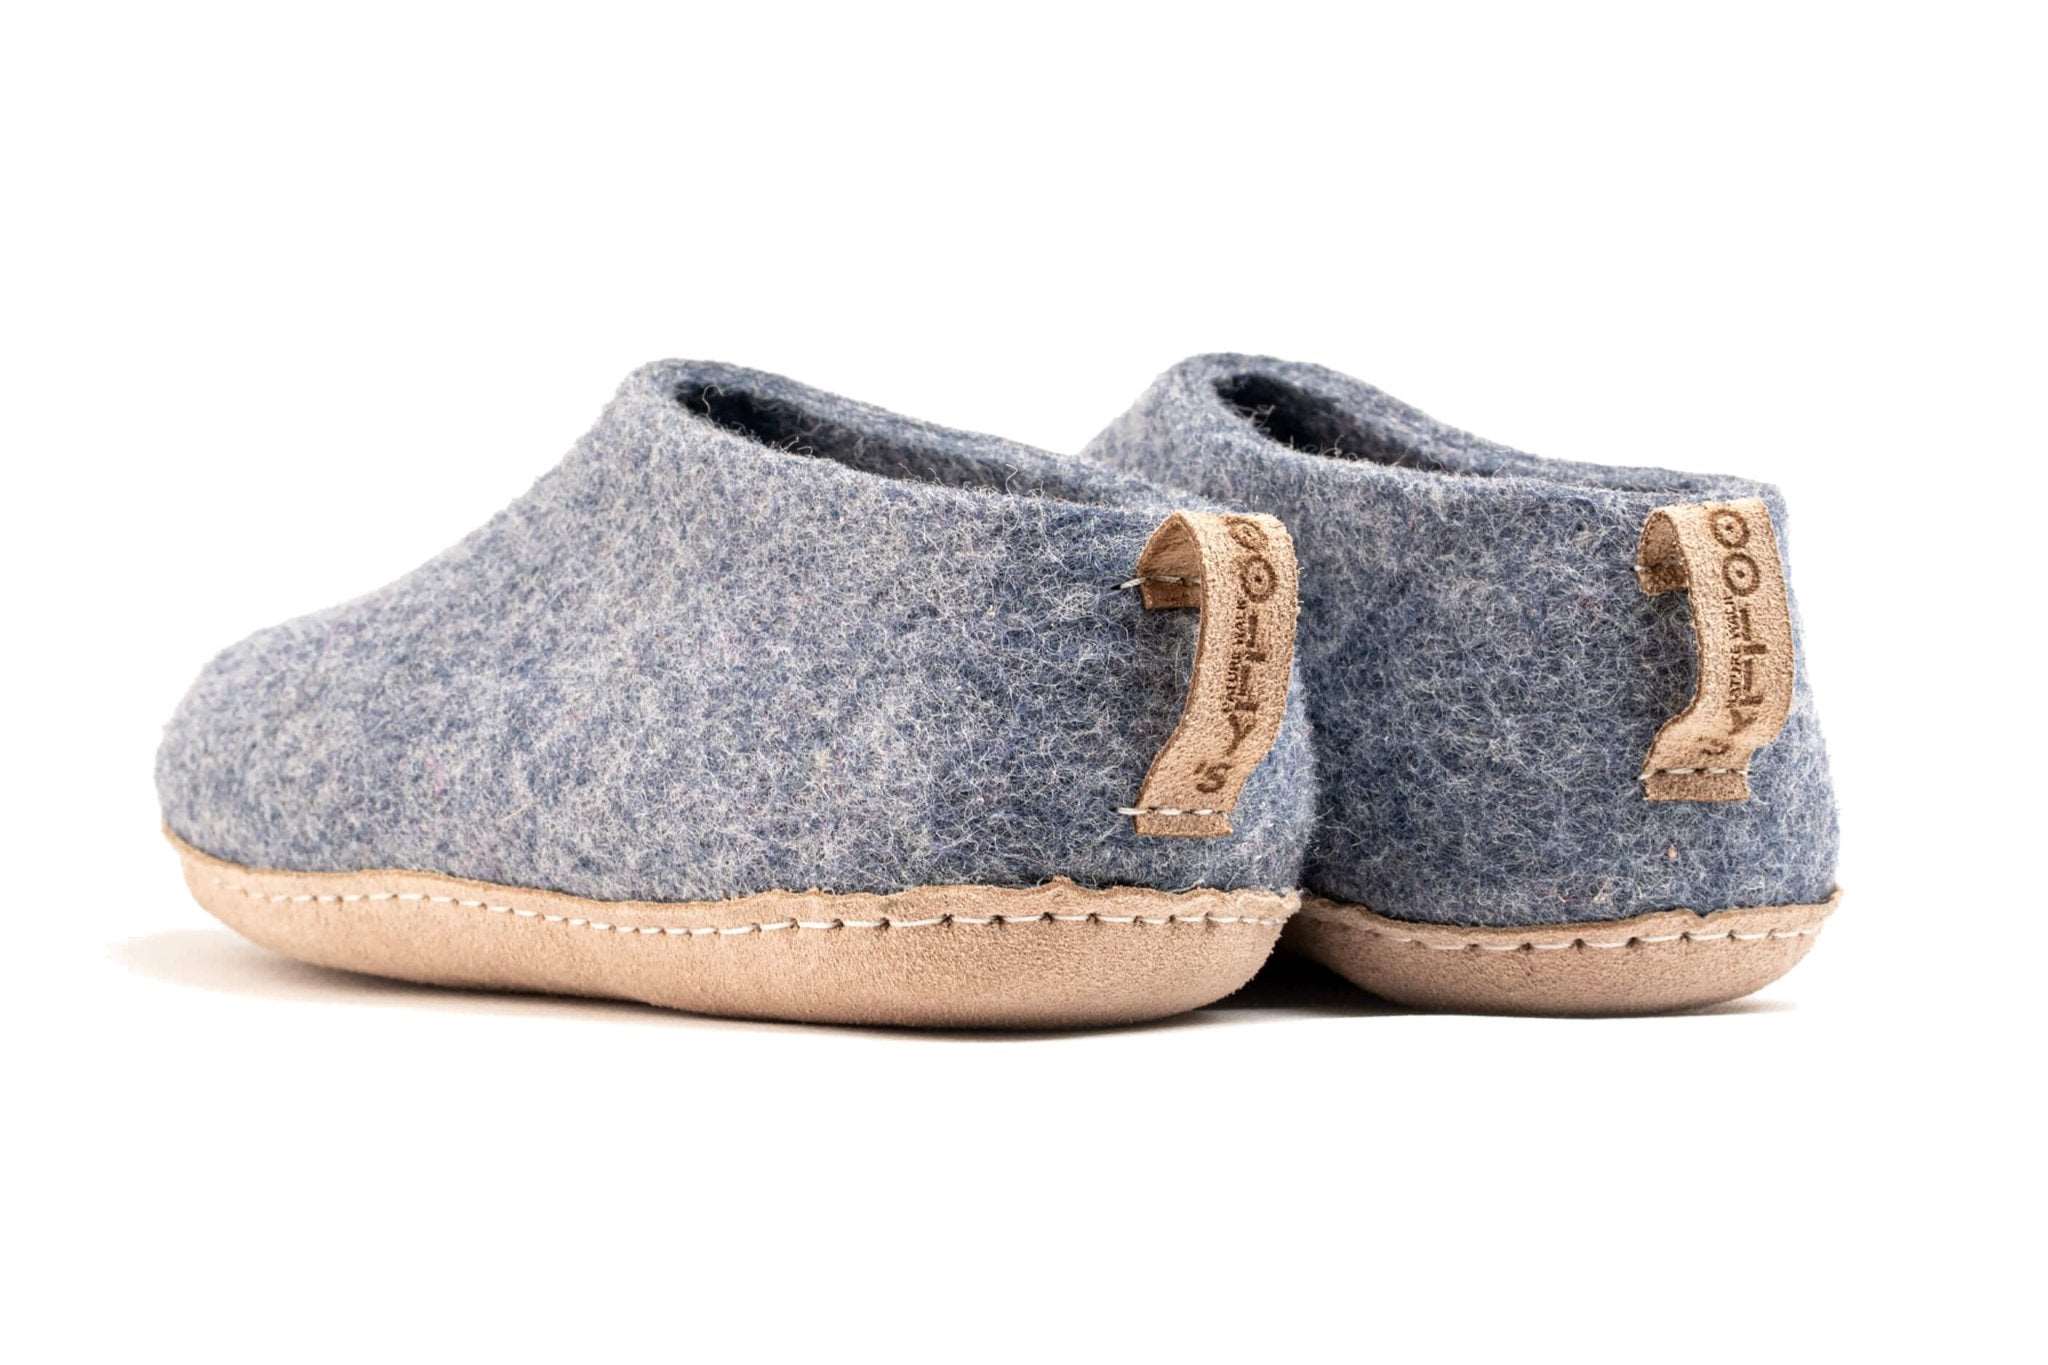 Indoor Shoes With Leather Sole - Denim - Woollyes